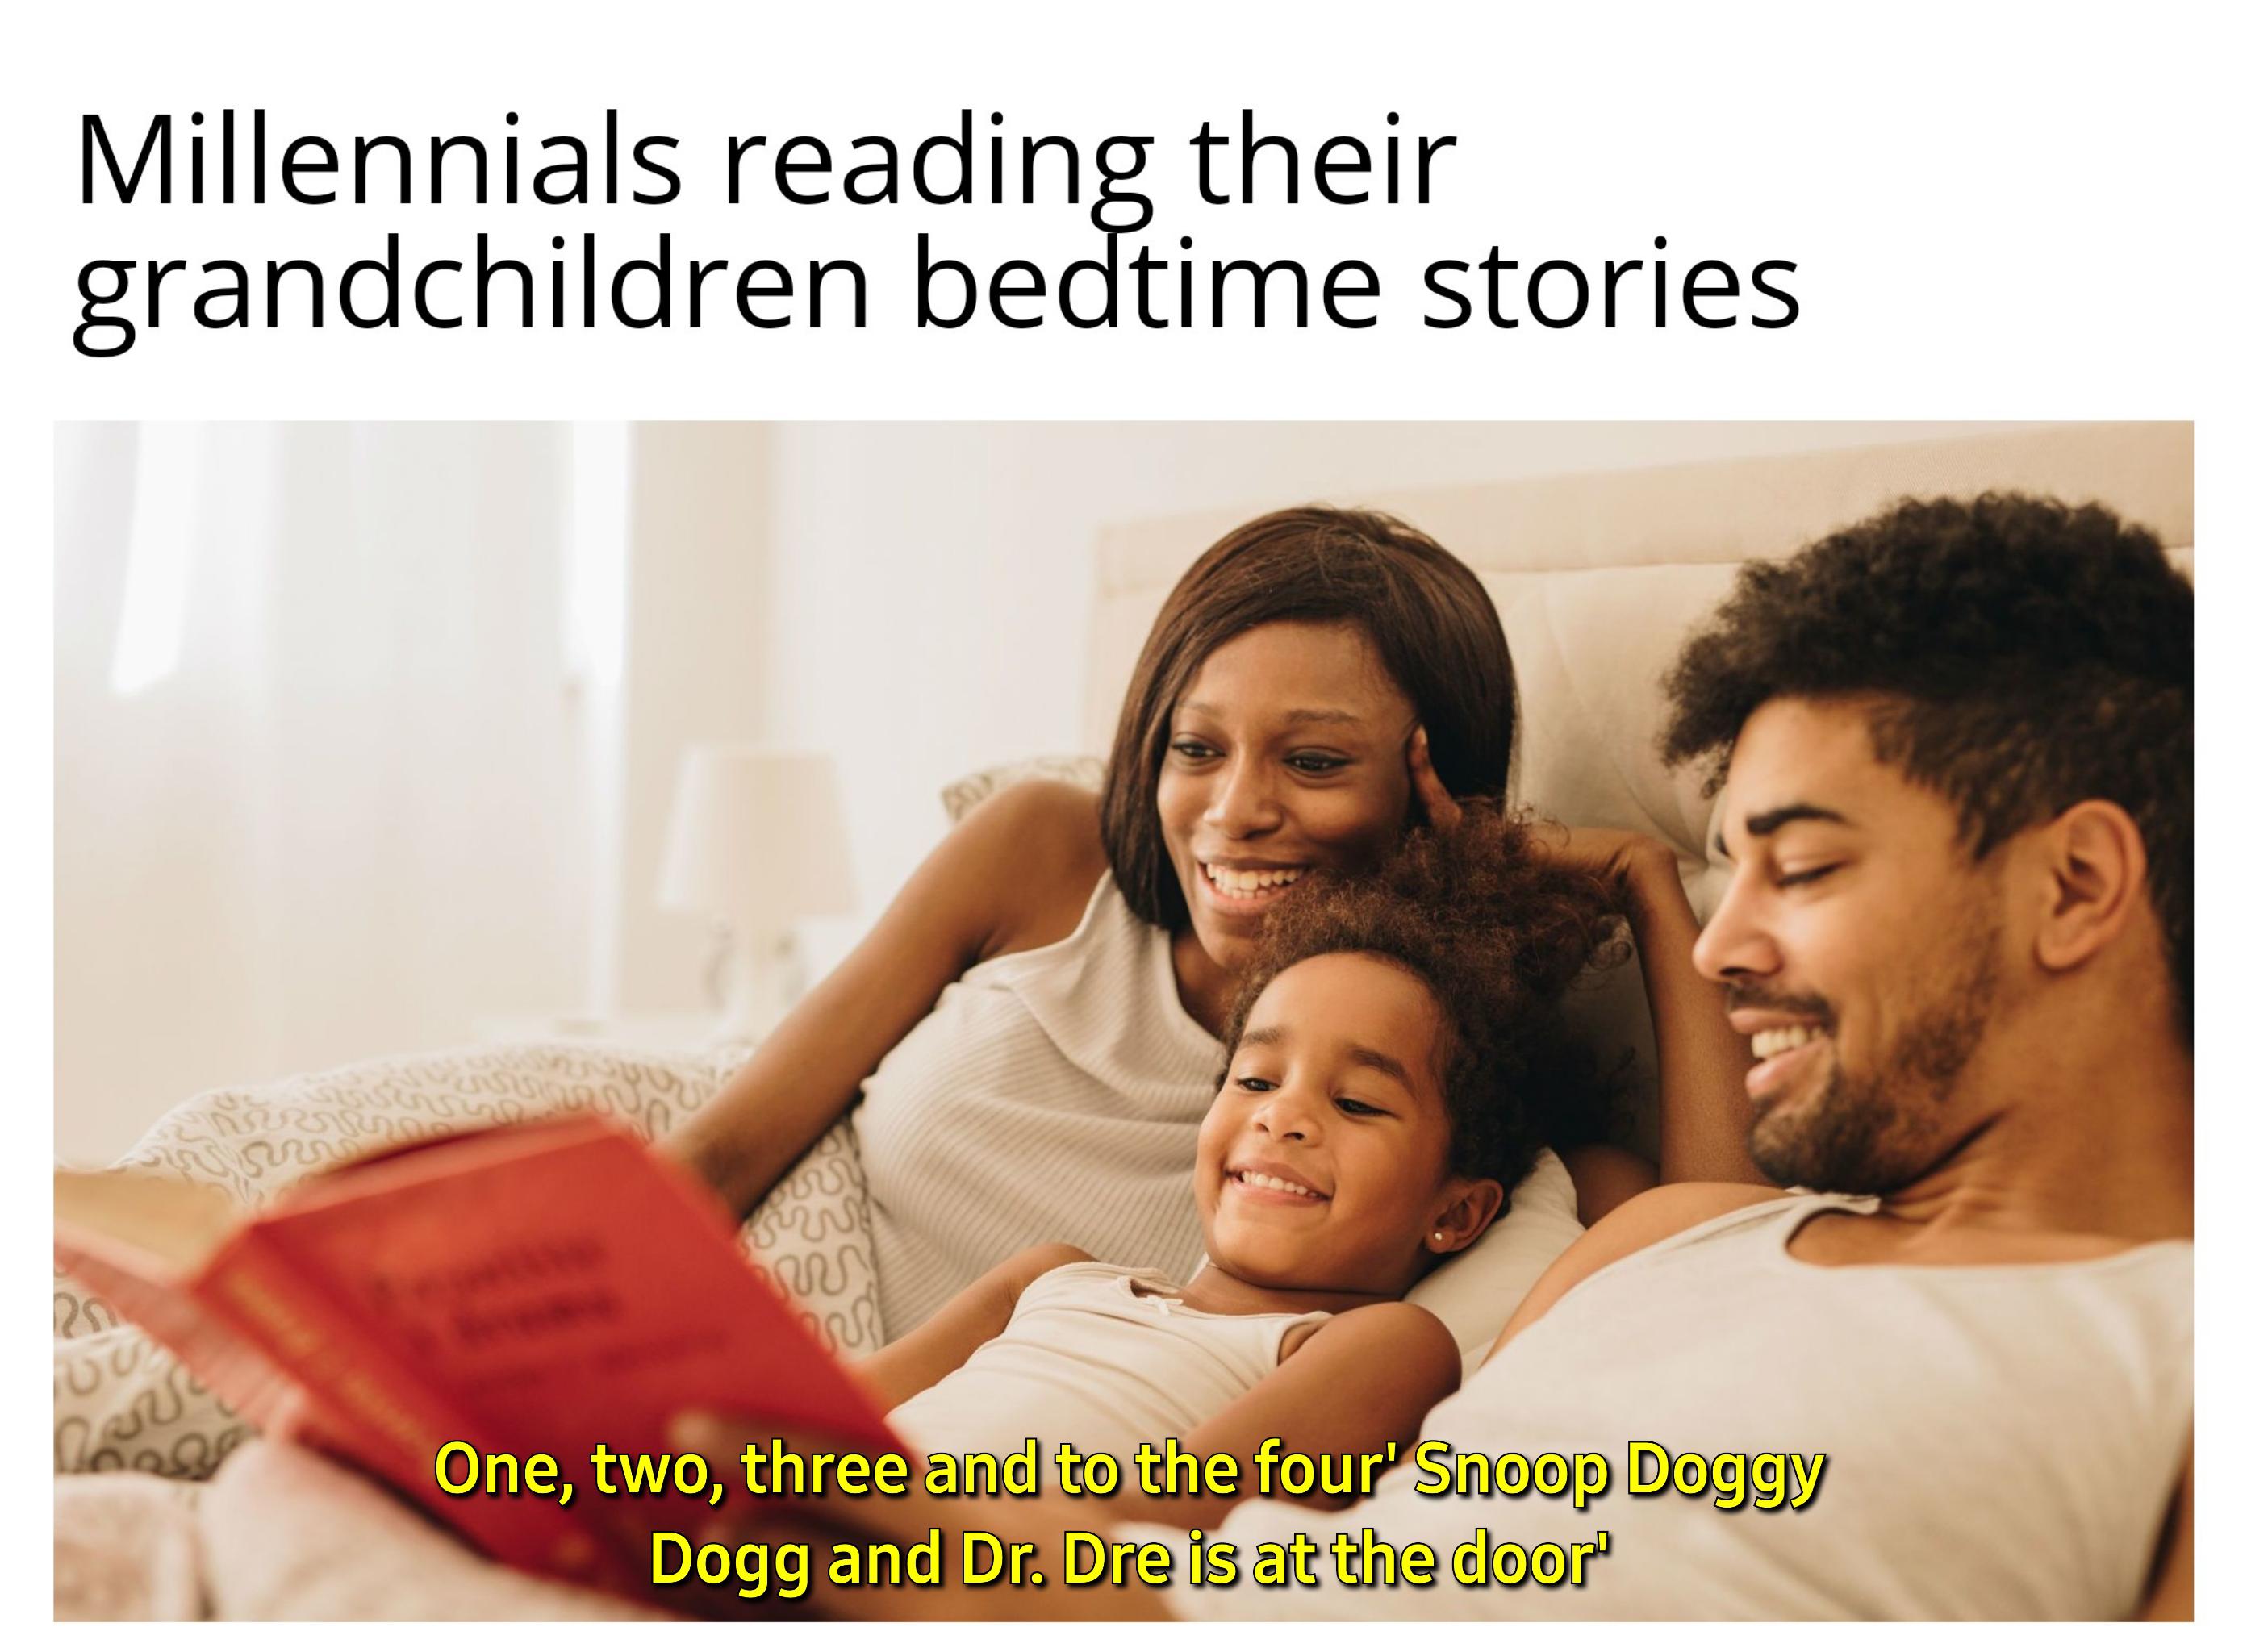 dank memes - funny memes - photo caption - Millennials reading their grandchildren bedtime stories Ursu Rs w eur One, two, three and to the four' Snoop Doggy Dogg and Dr. Dre is at the door